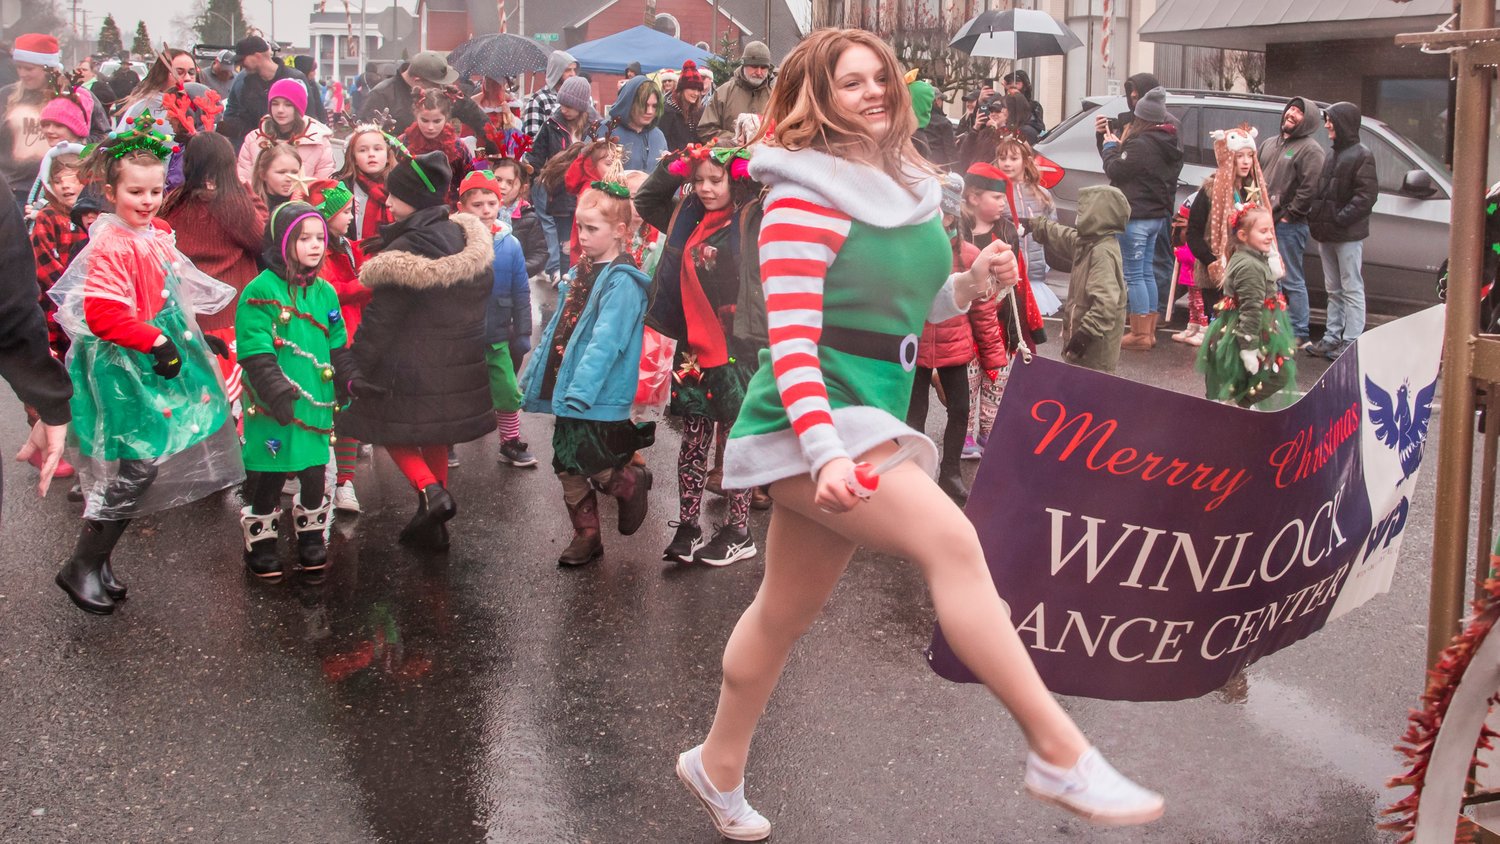 Members of the Winlock Dance Center make their way through downtown Chehalis during the Santa Parade in December 2021.